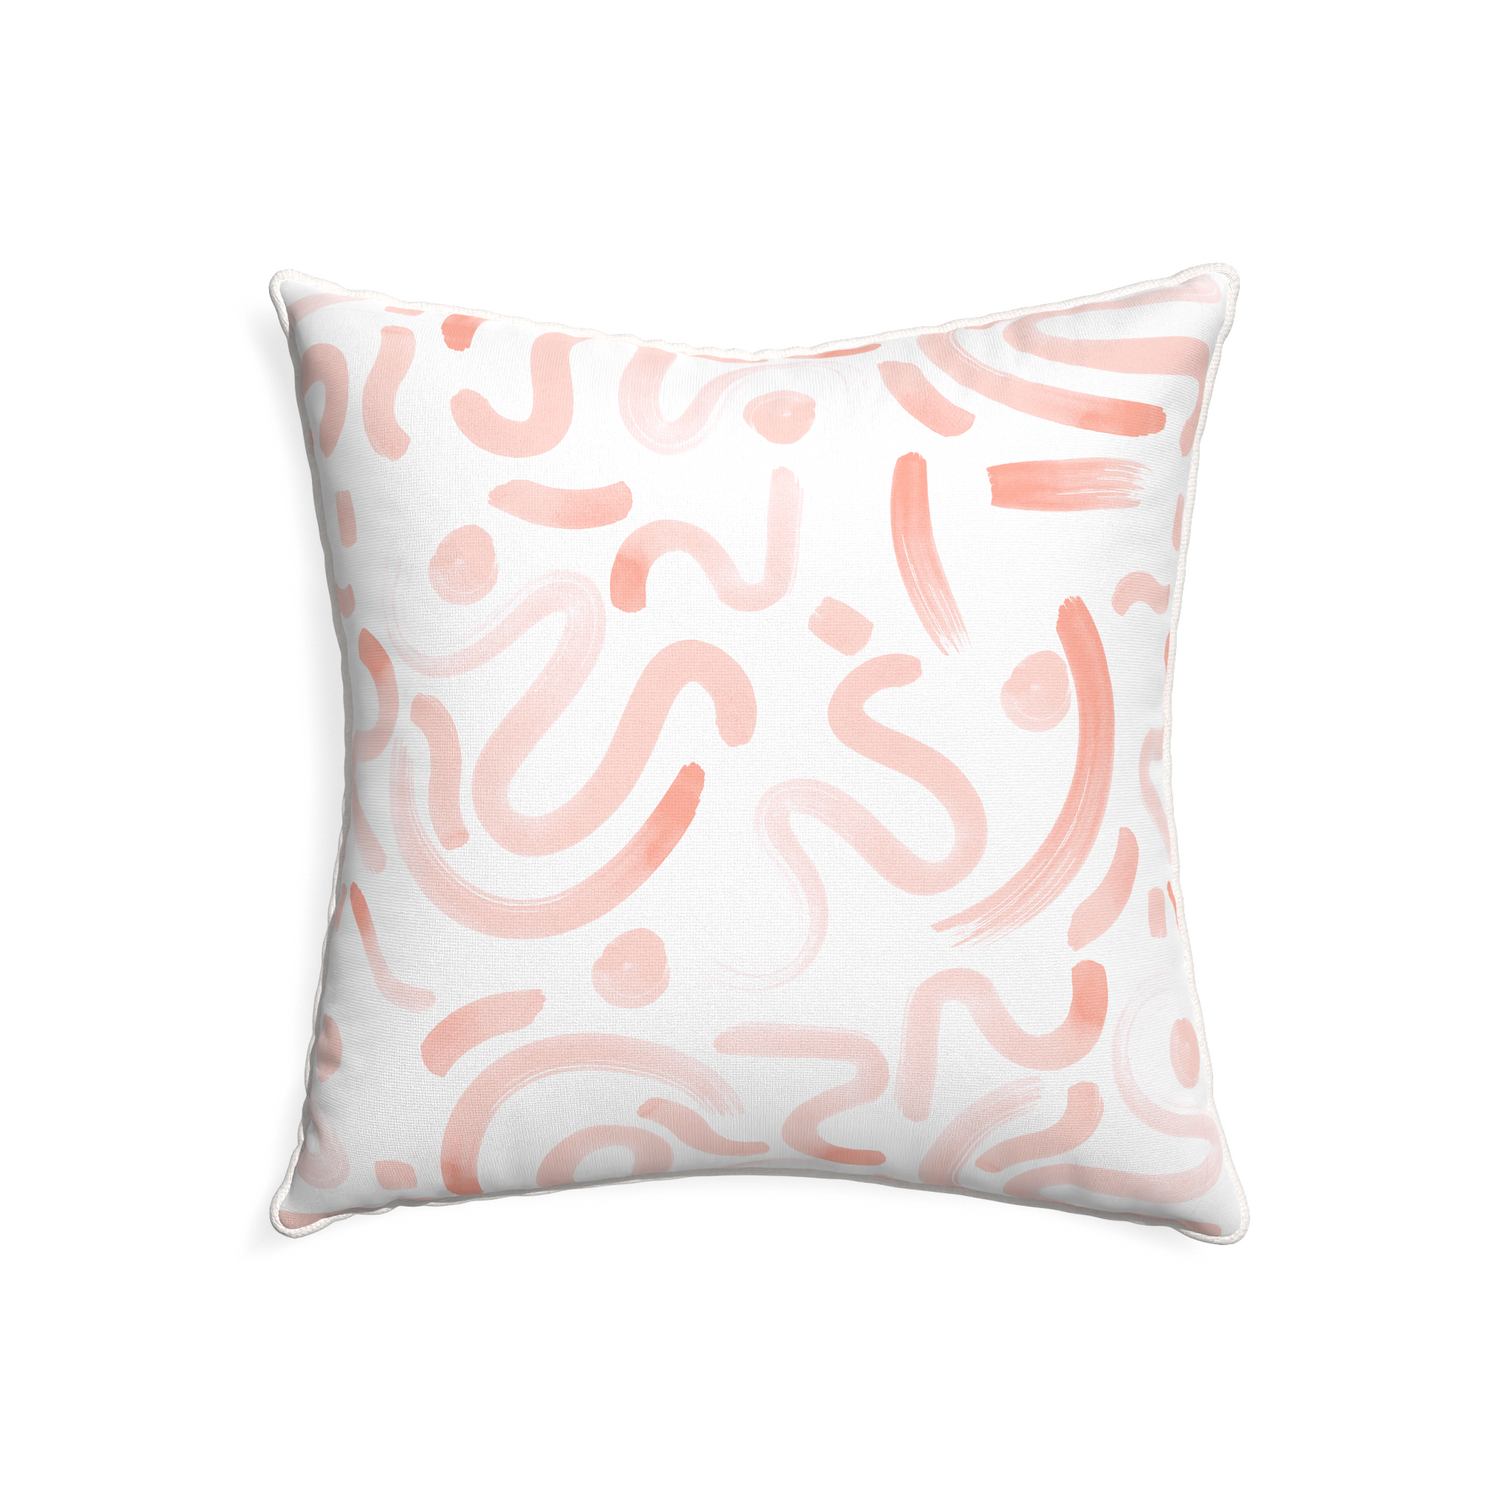 22-square hockney pink custom pillow with snow piping on white background